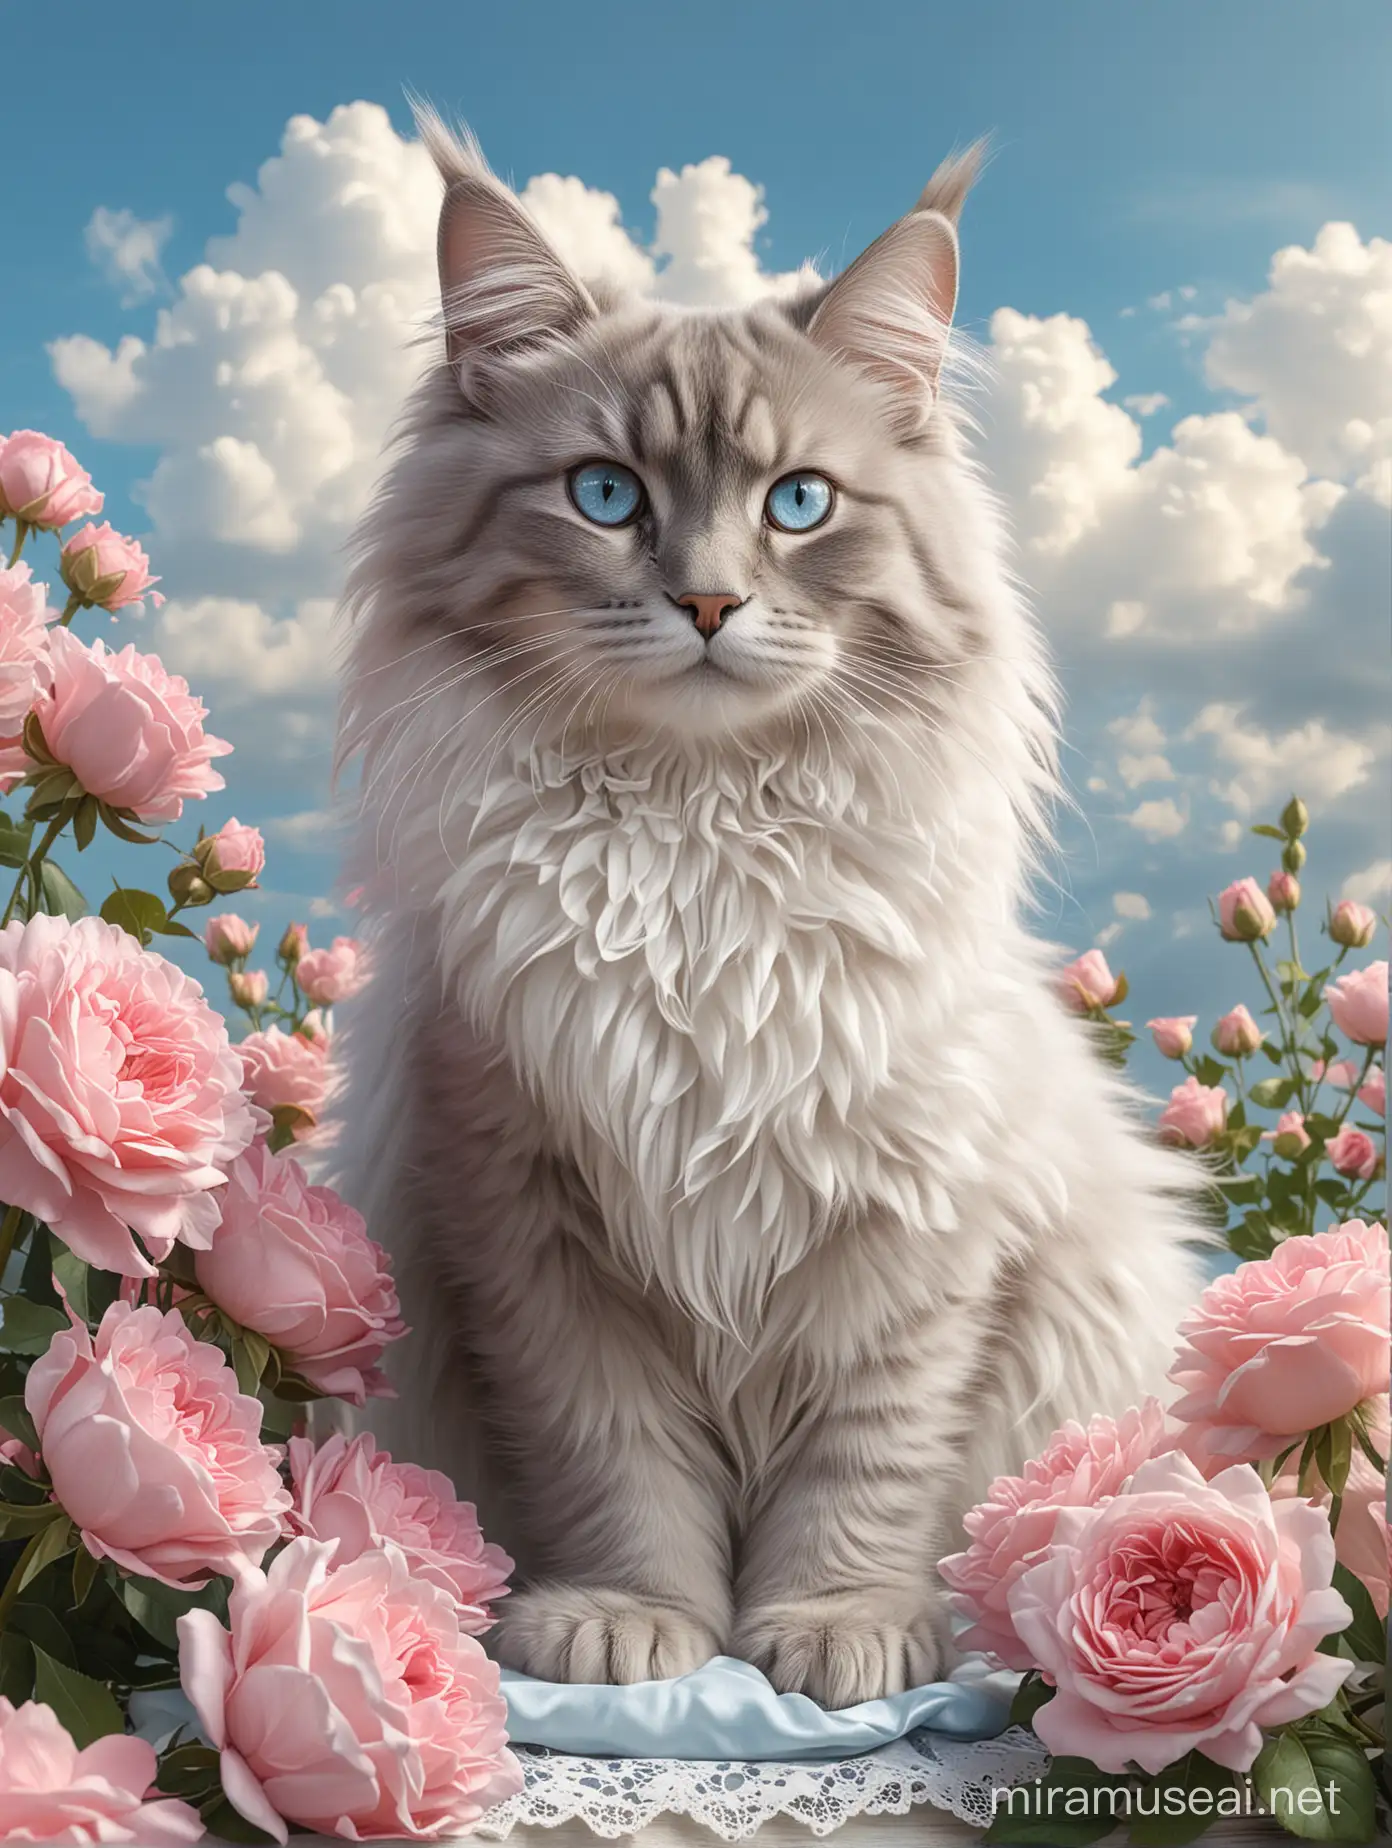 Adorable Maine Coon Cat in Princess Dress Holding Bouquet of 9999 Pink Roses Against Blue Sky and White Clouds